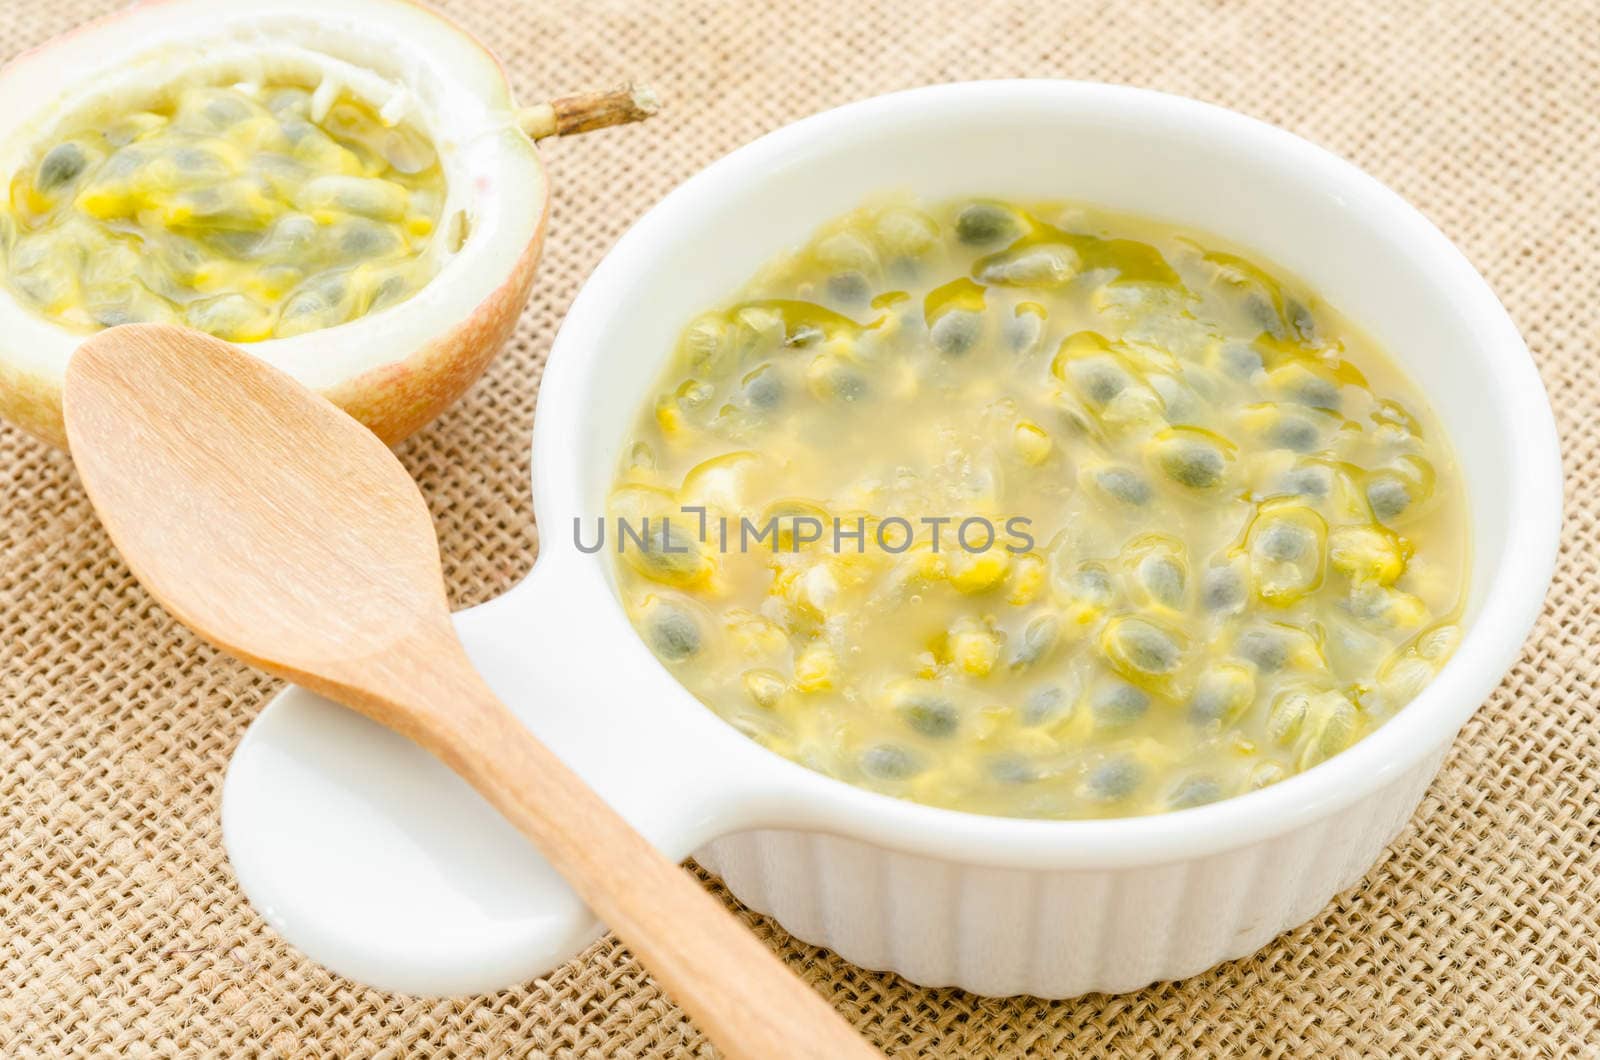 Passion fruit juice in white cup with wooden spoon on sack background.